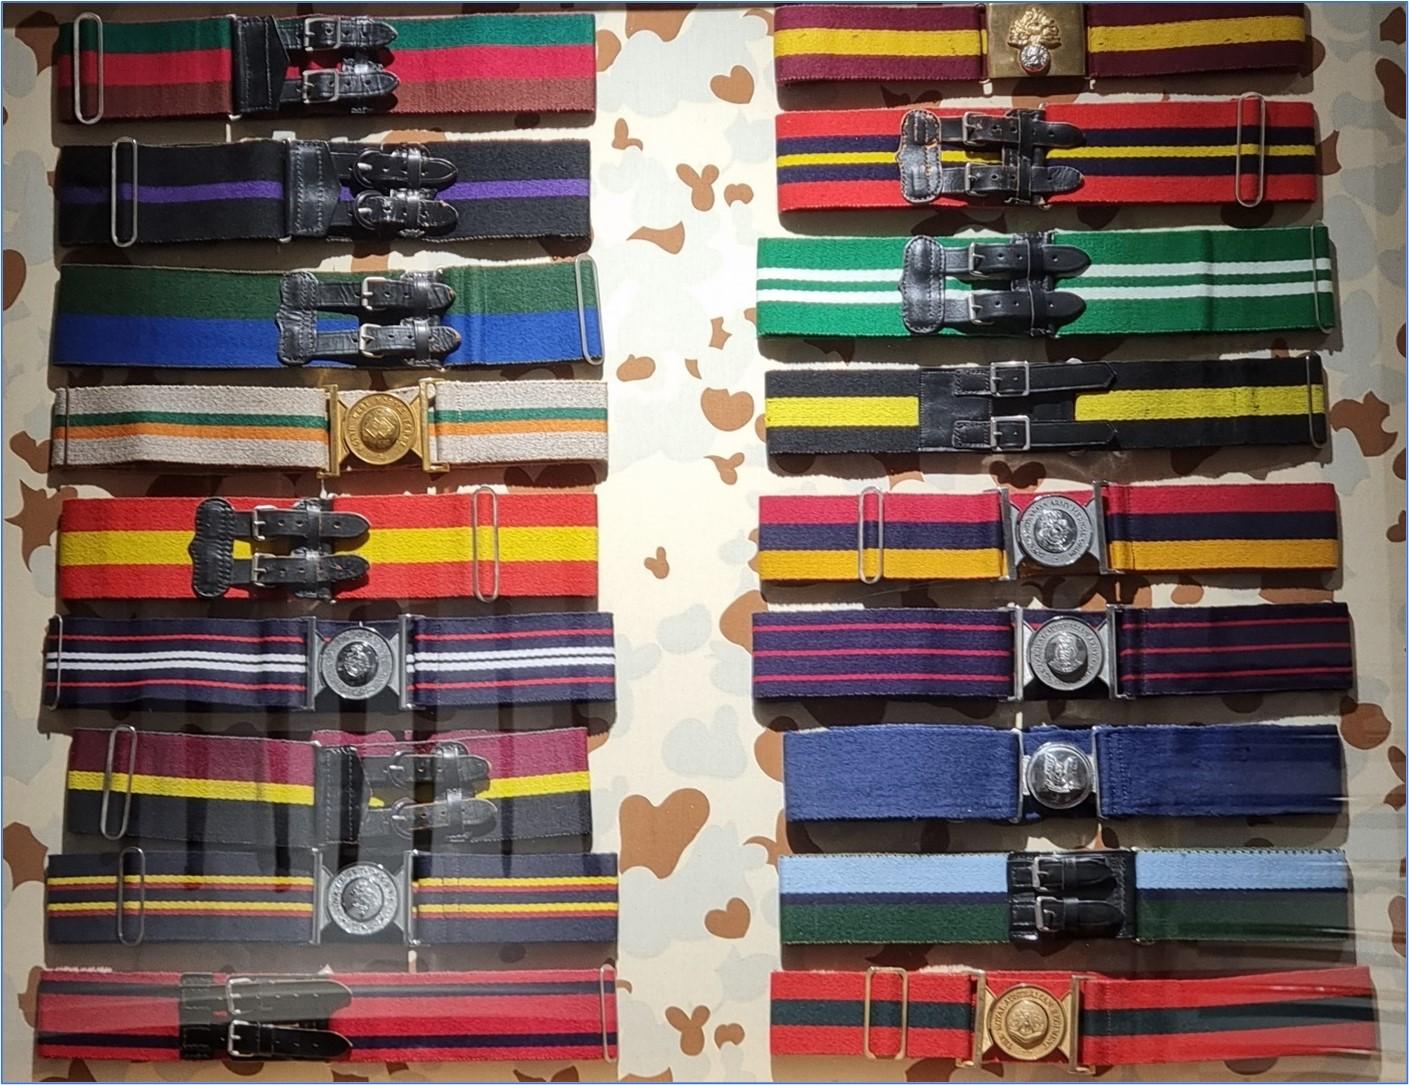 Display of stable belts